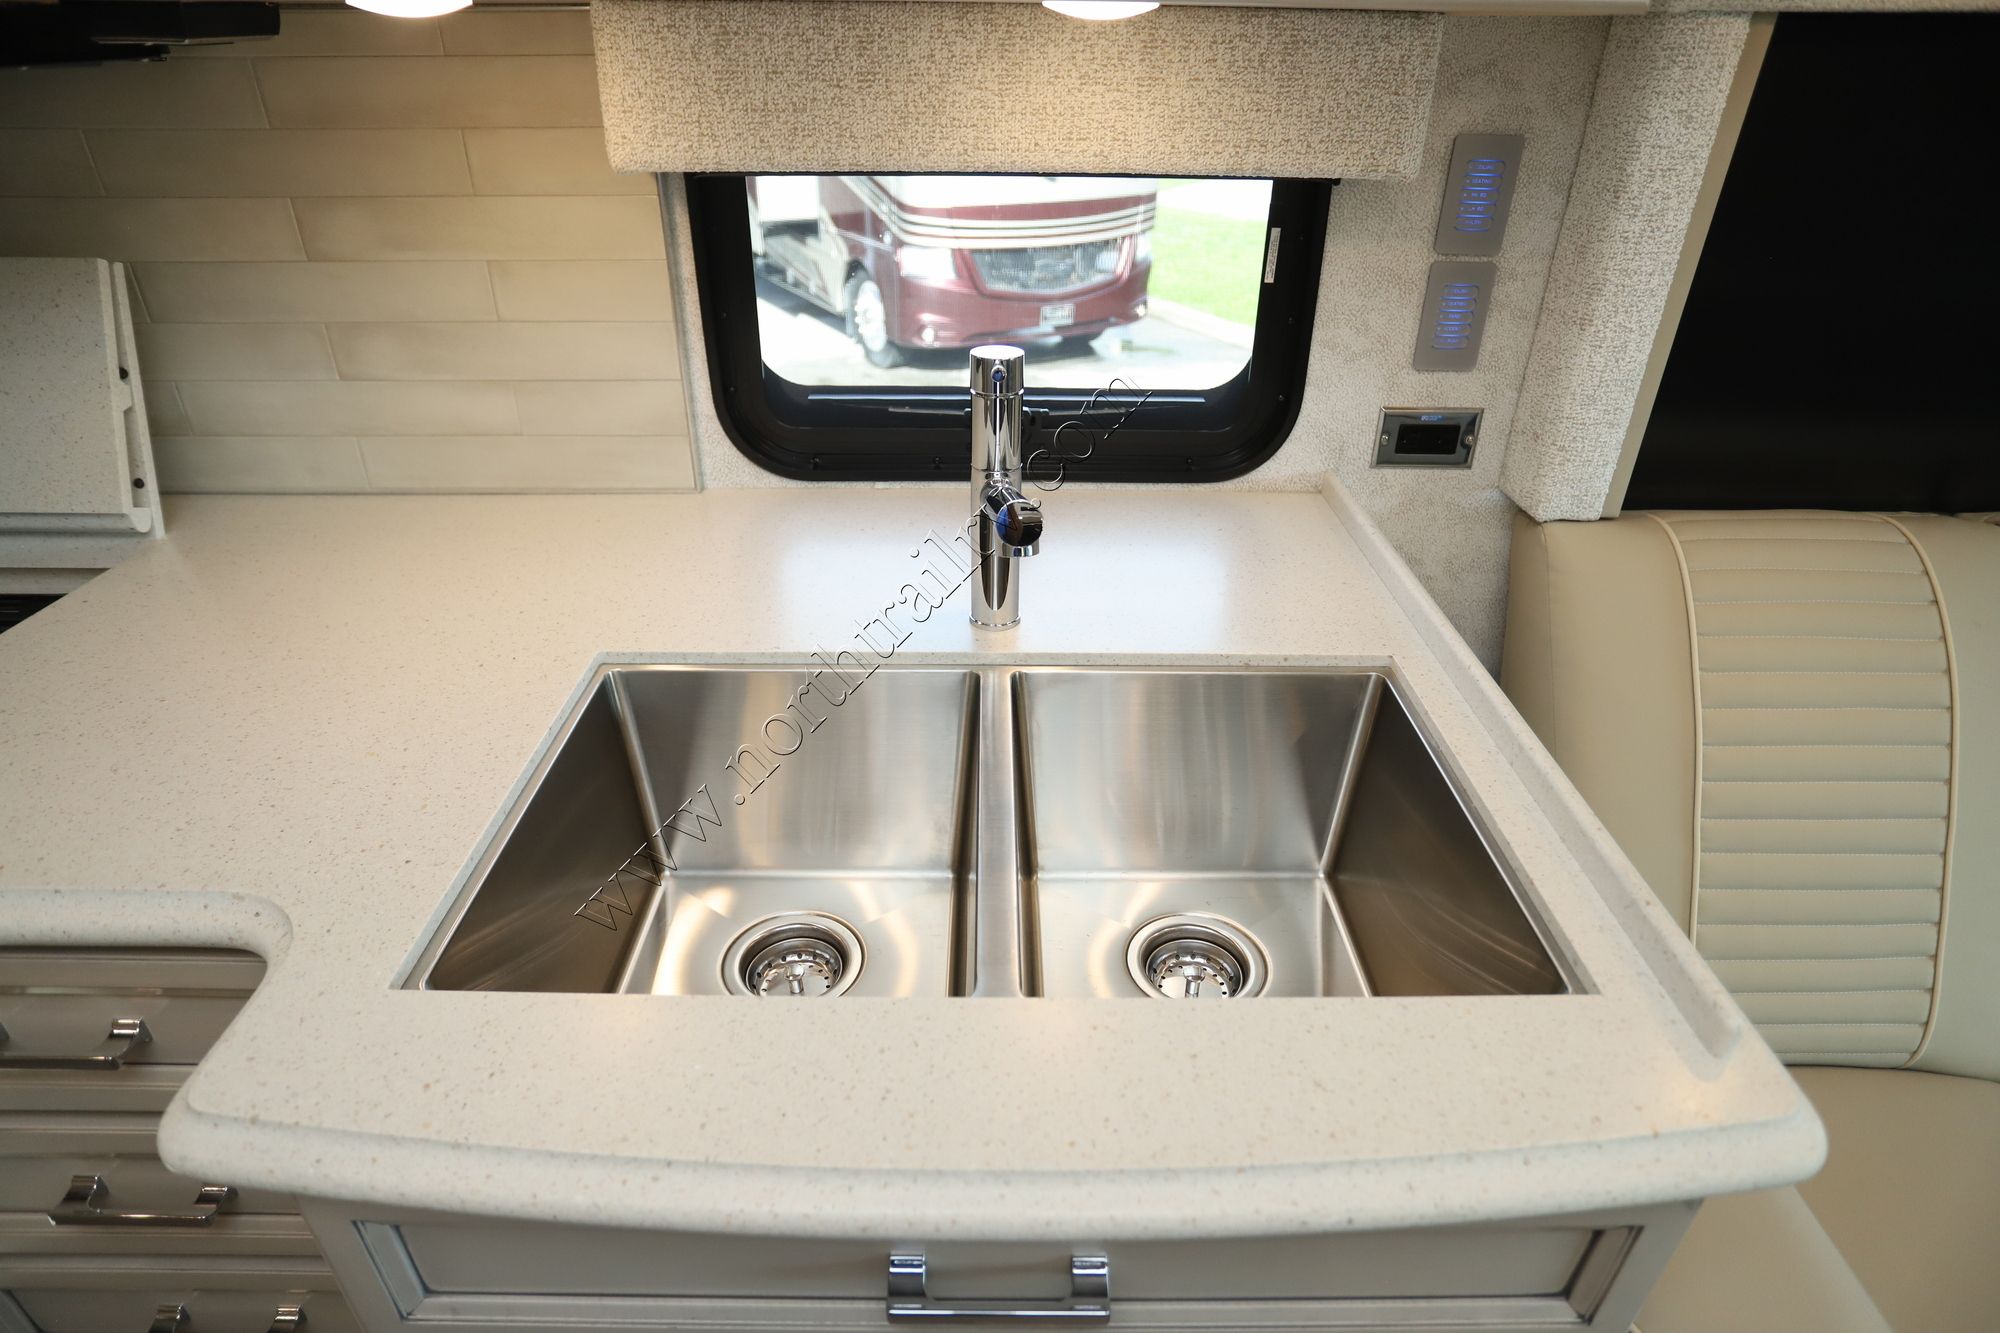 New 2023 Newmar Bay Star 3629 Class A  For Sale